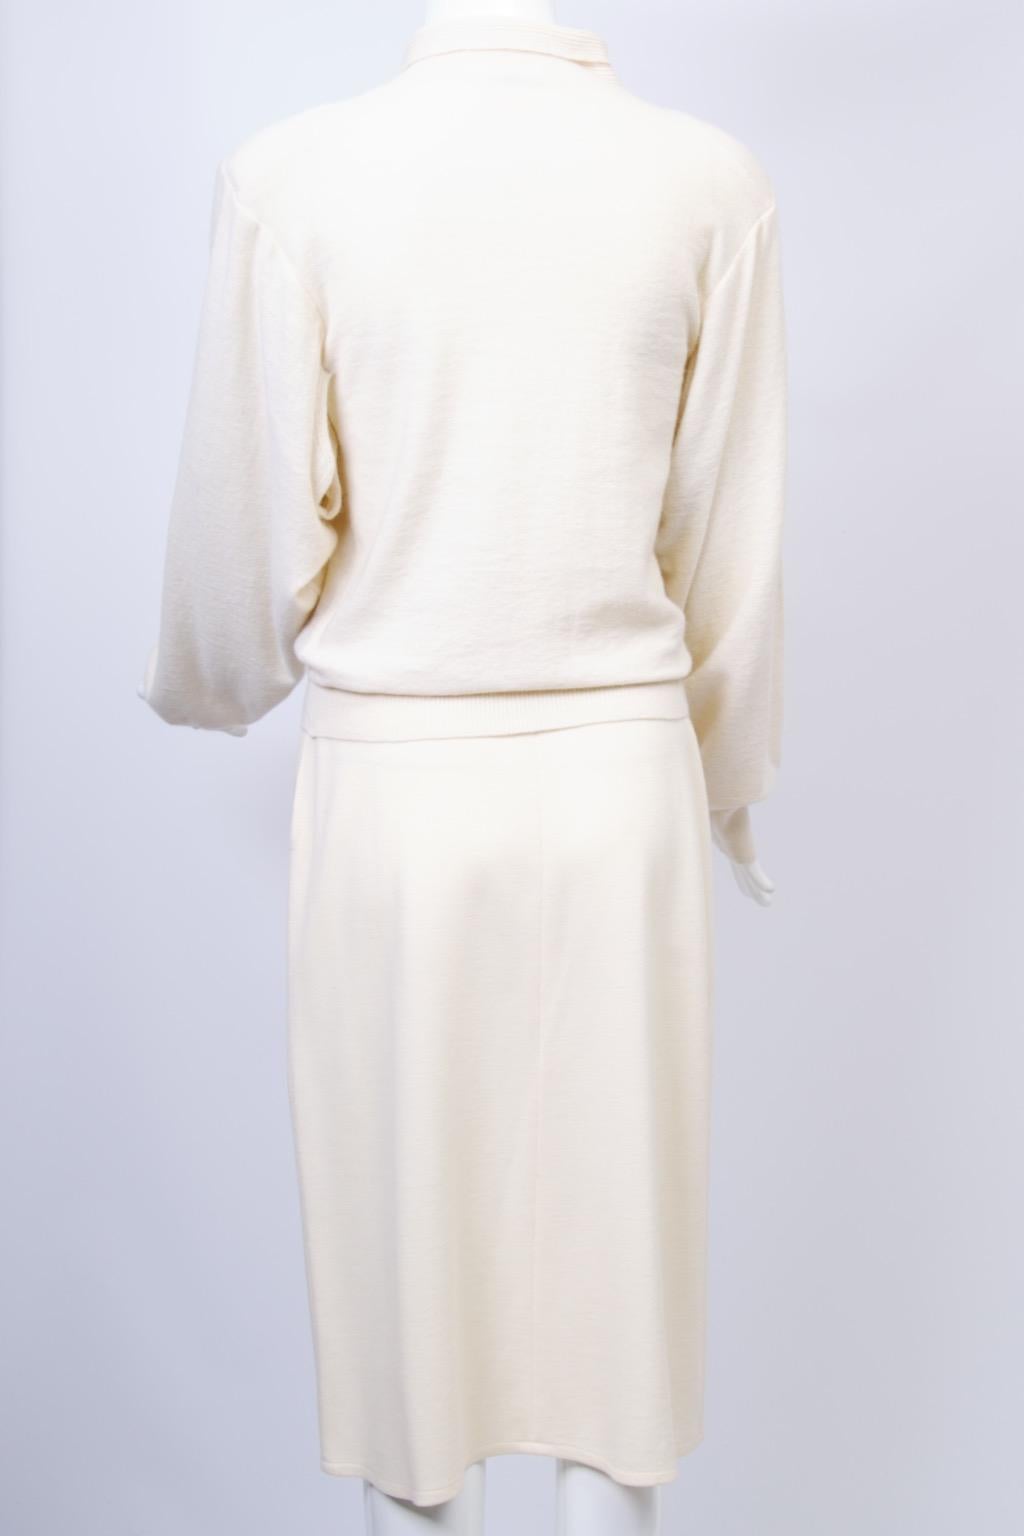 Sonia Rykiel Ivory Sweater and Skirt Ensemble For Sale 2